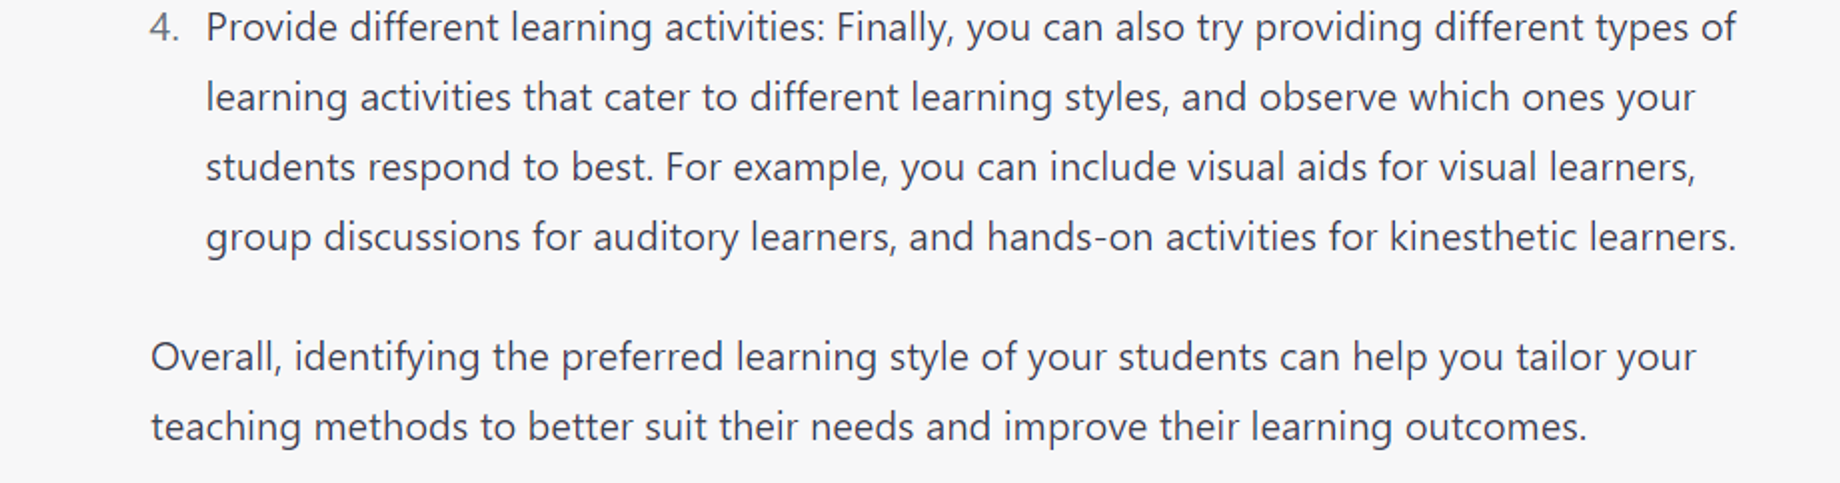 7 Proven ChatGPT Prompts: Analyze learning styles